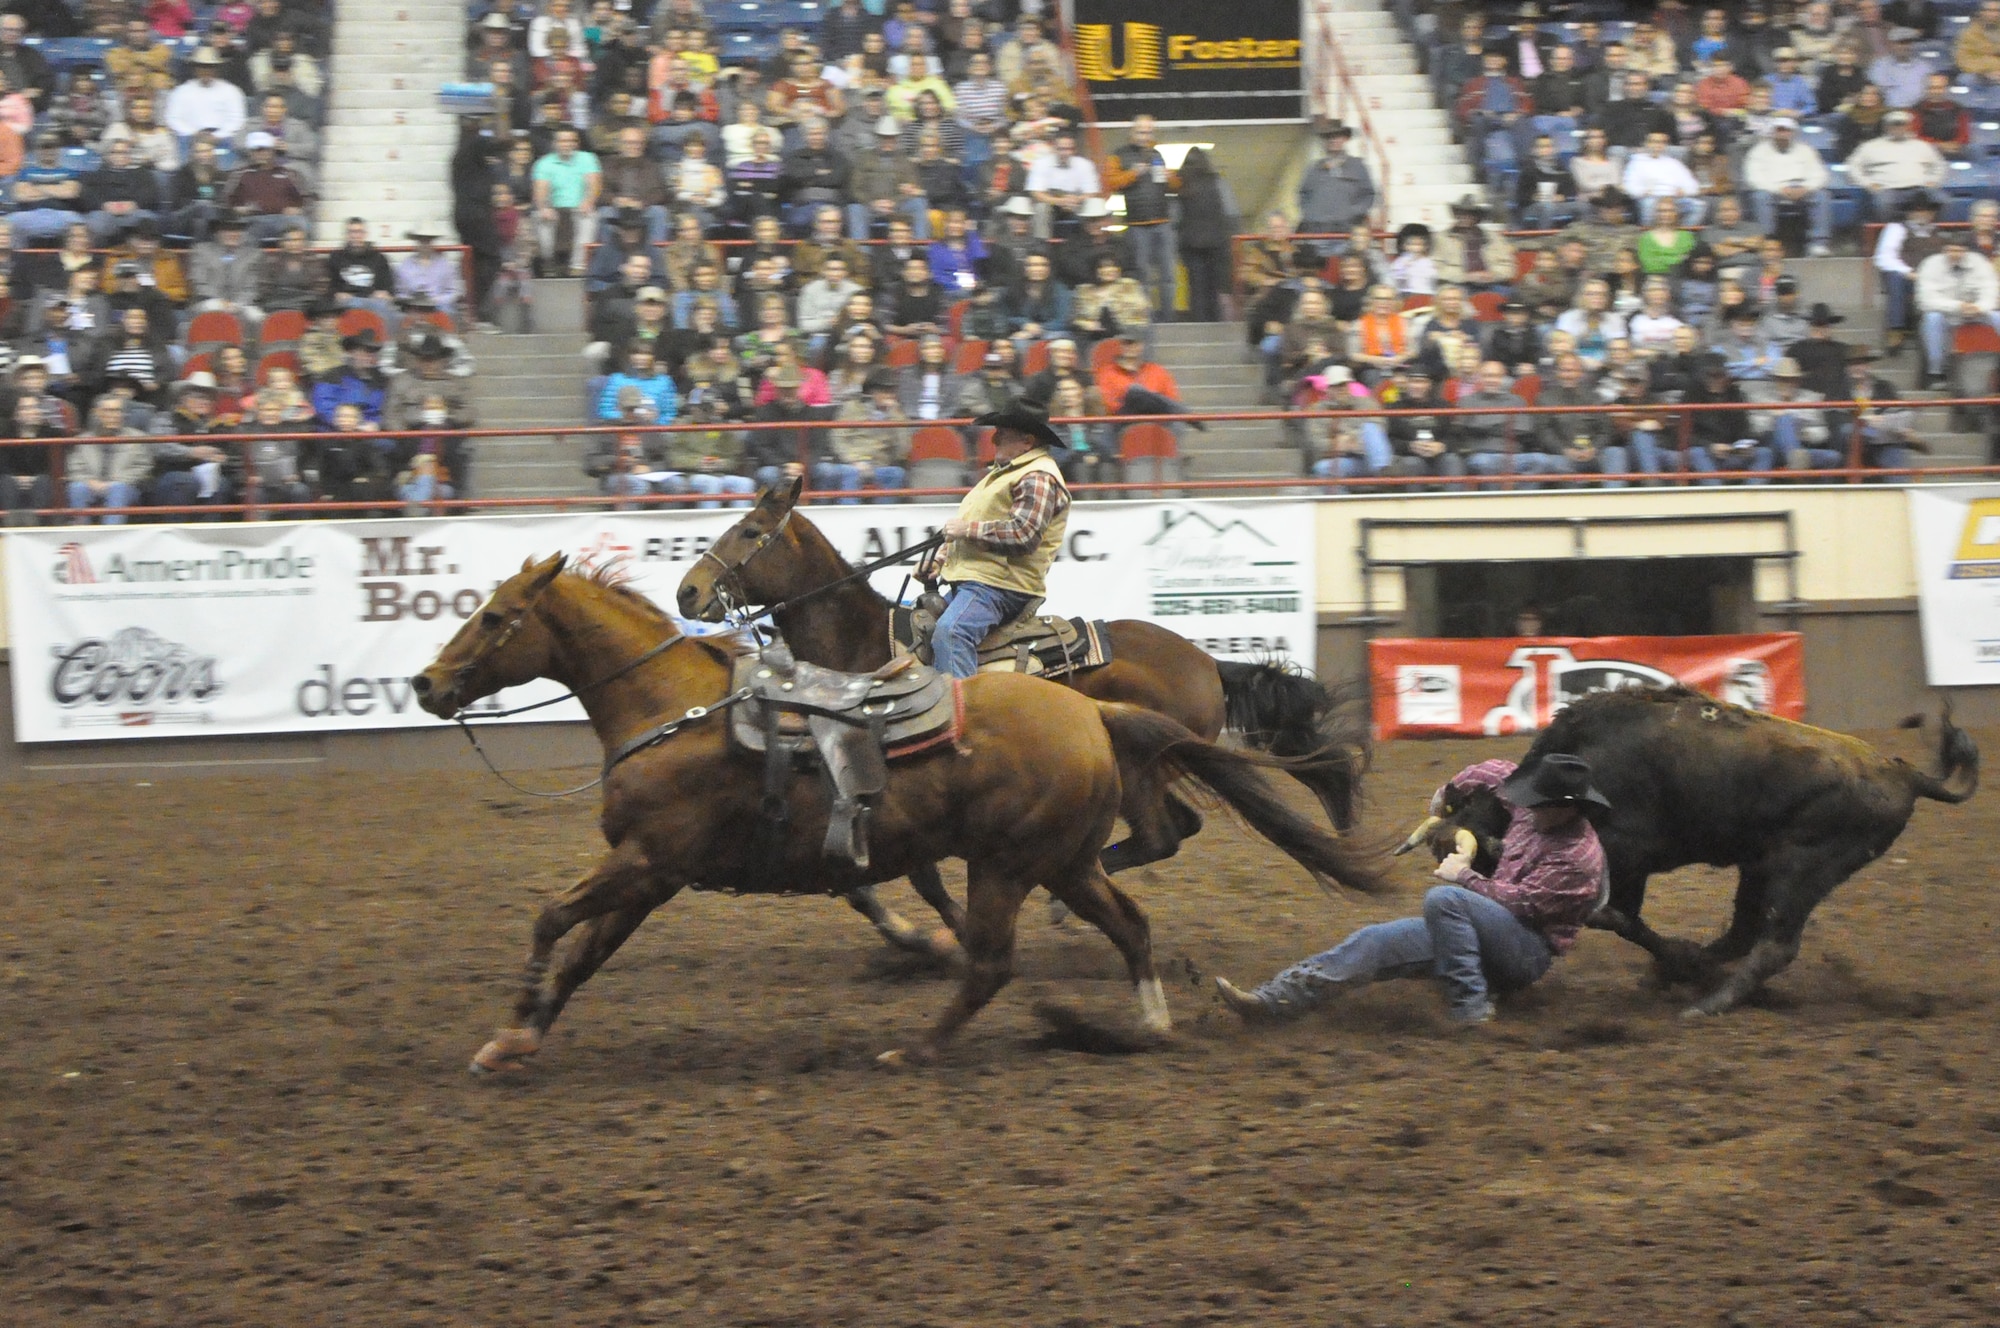 SAN ANGELO, Texas – Jack Hodges, a competitor in the San Angelo Stock Show and Rodeo tries to bring down a bull during the San Angelo Stock Show and Rodeo’s Military Appreciation Night at the Foster Communication Coliseum here Feb. 26. There were several other events that night including calf roping, bareback horse riding, girl’s barrel racing and more. (U.S. Air Force photo/ Airman 1st Class Breonna Veal)